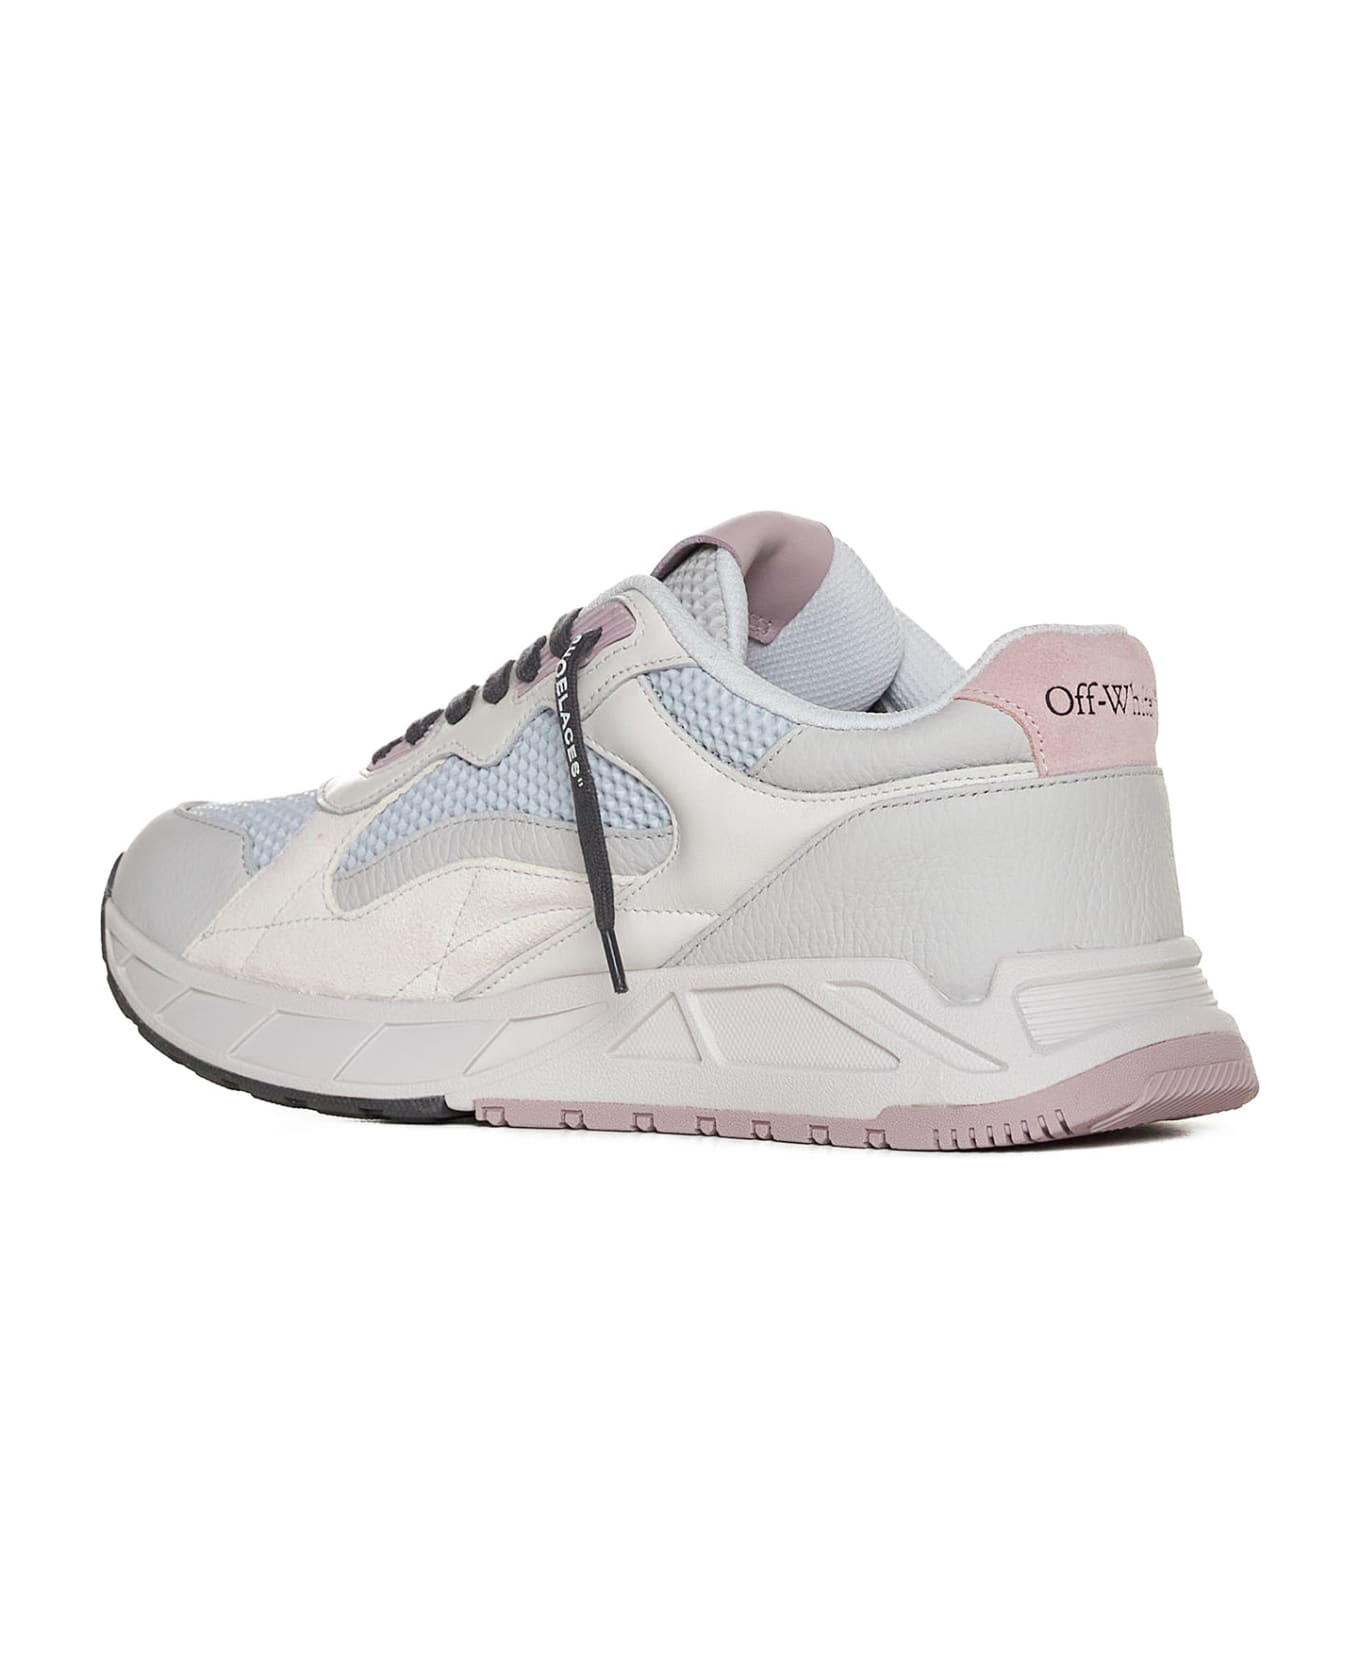 Off-White Sneakers - Off light blue lilac